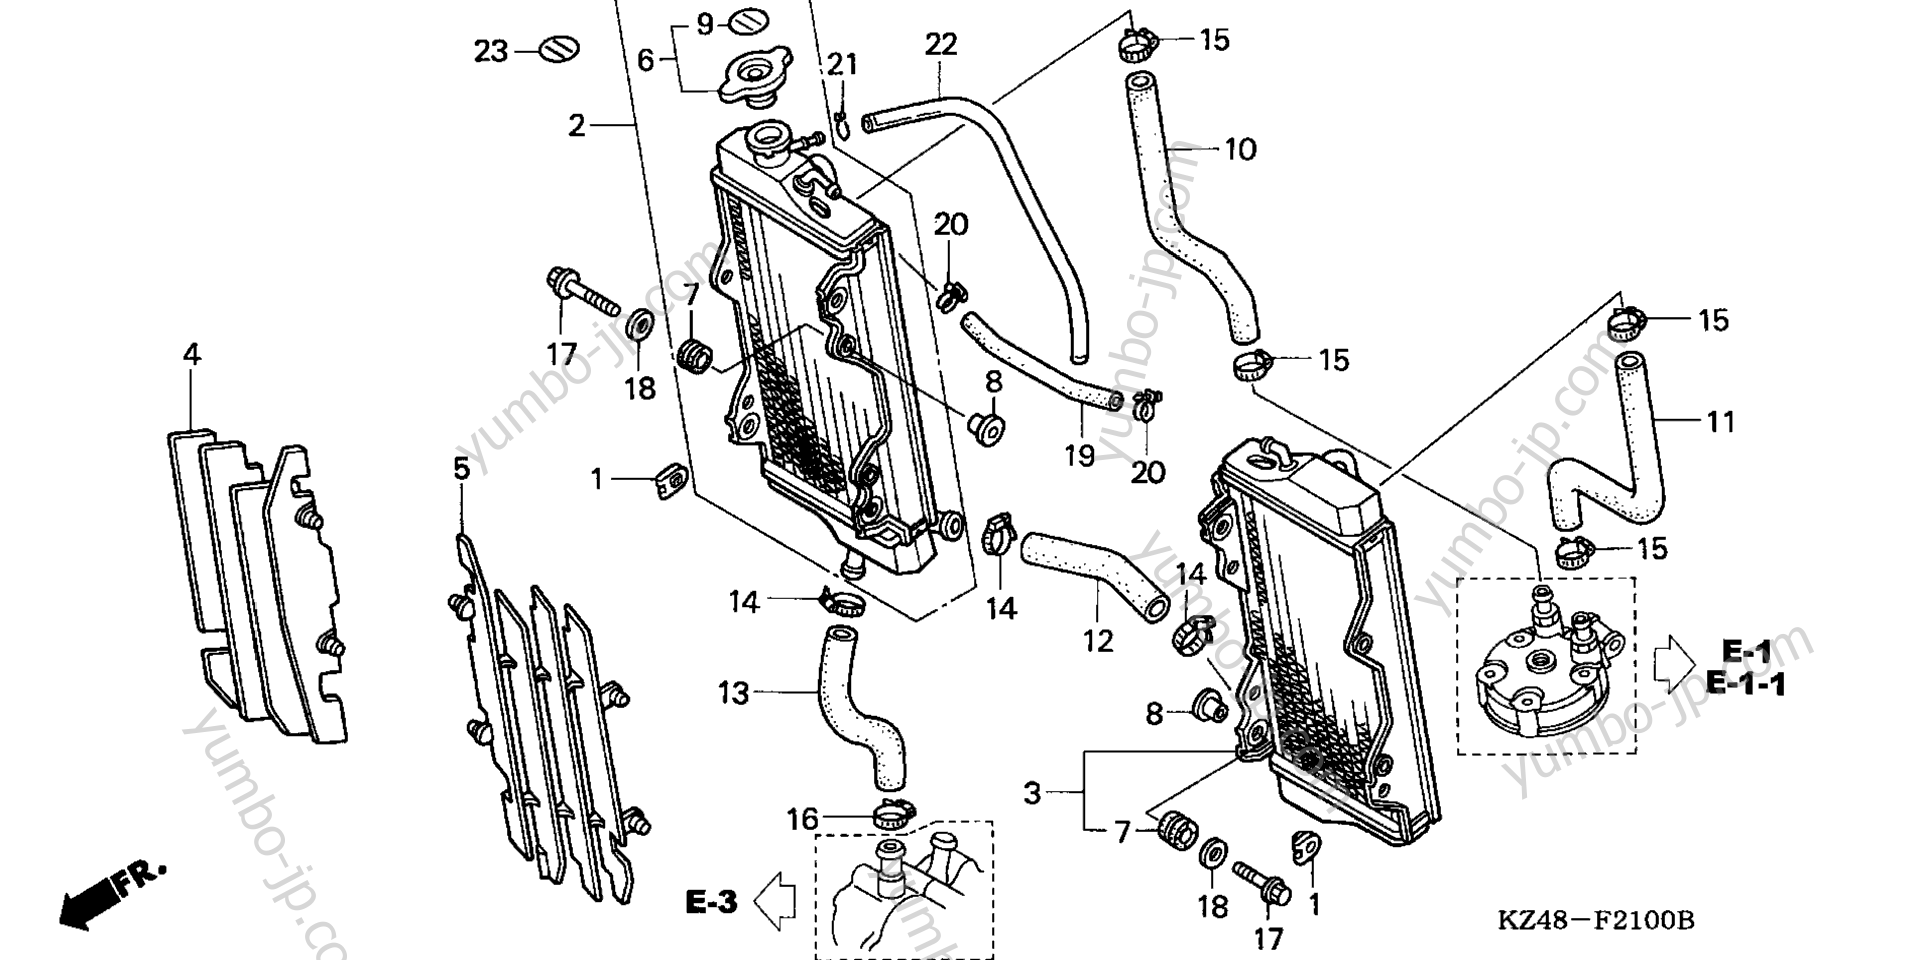 RADIATOR ('02-'04) for motorcycles HONDA CR125R A 2004 year